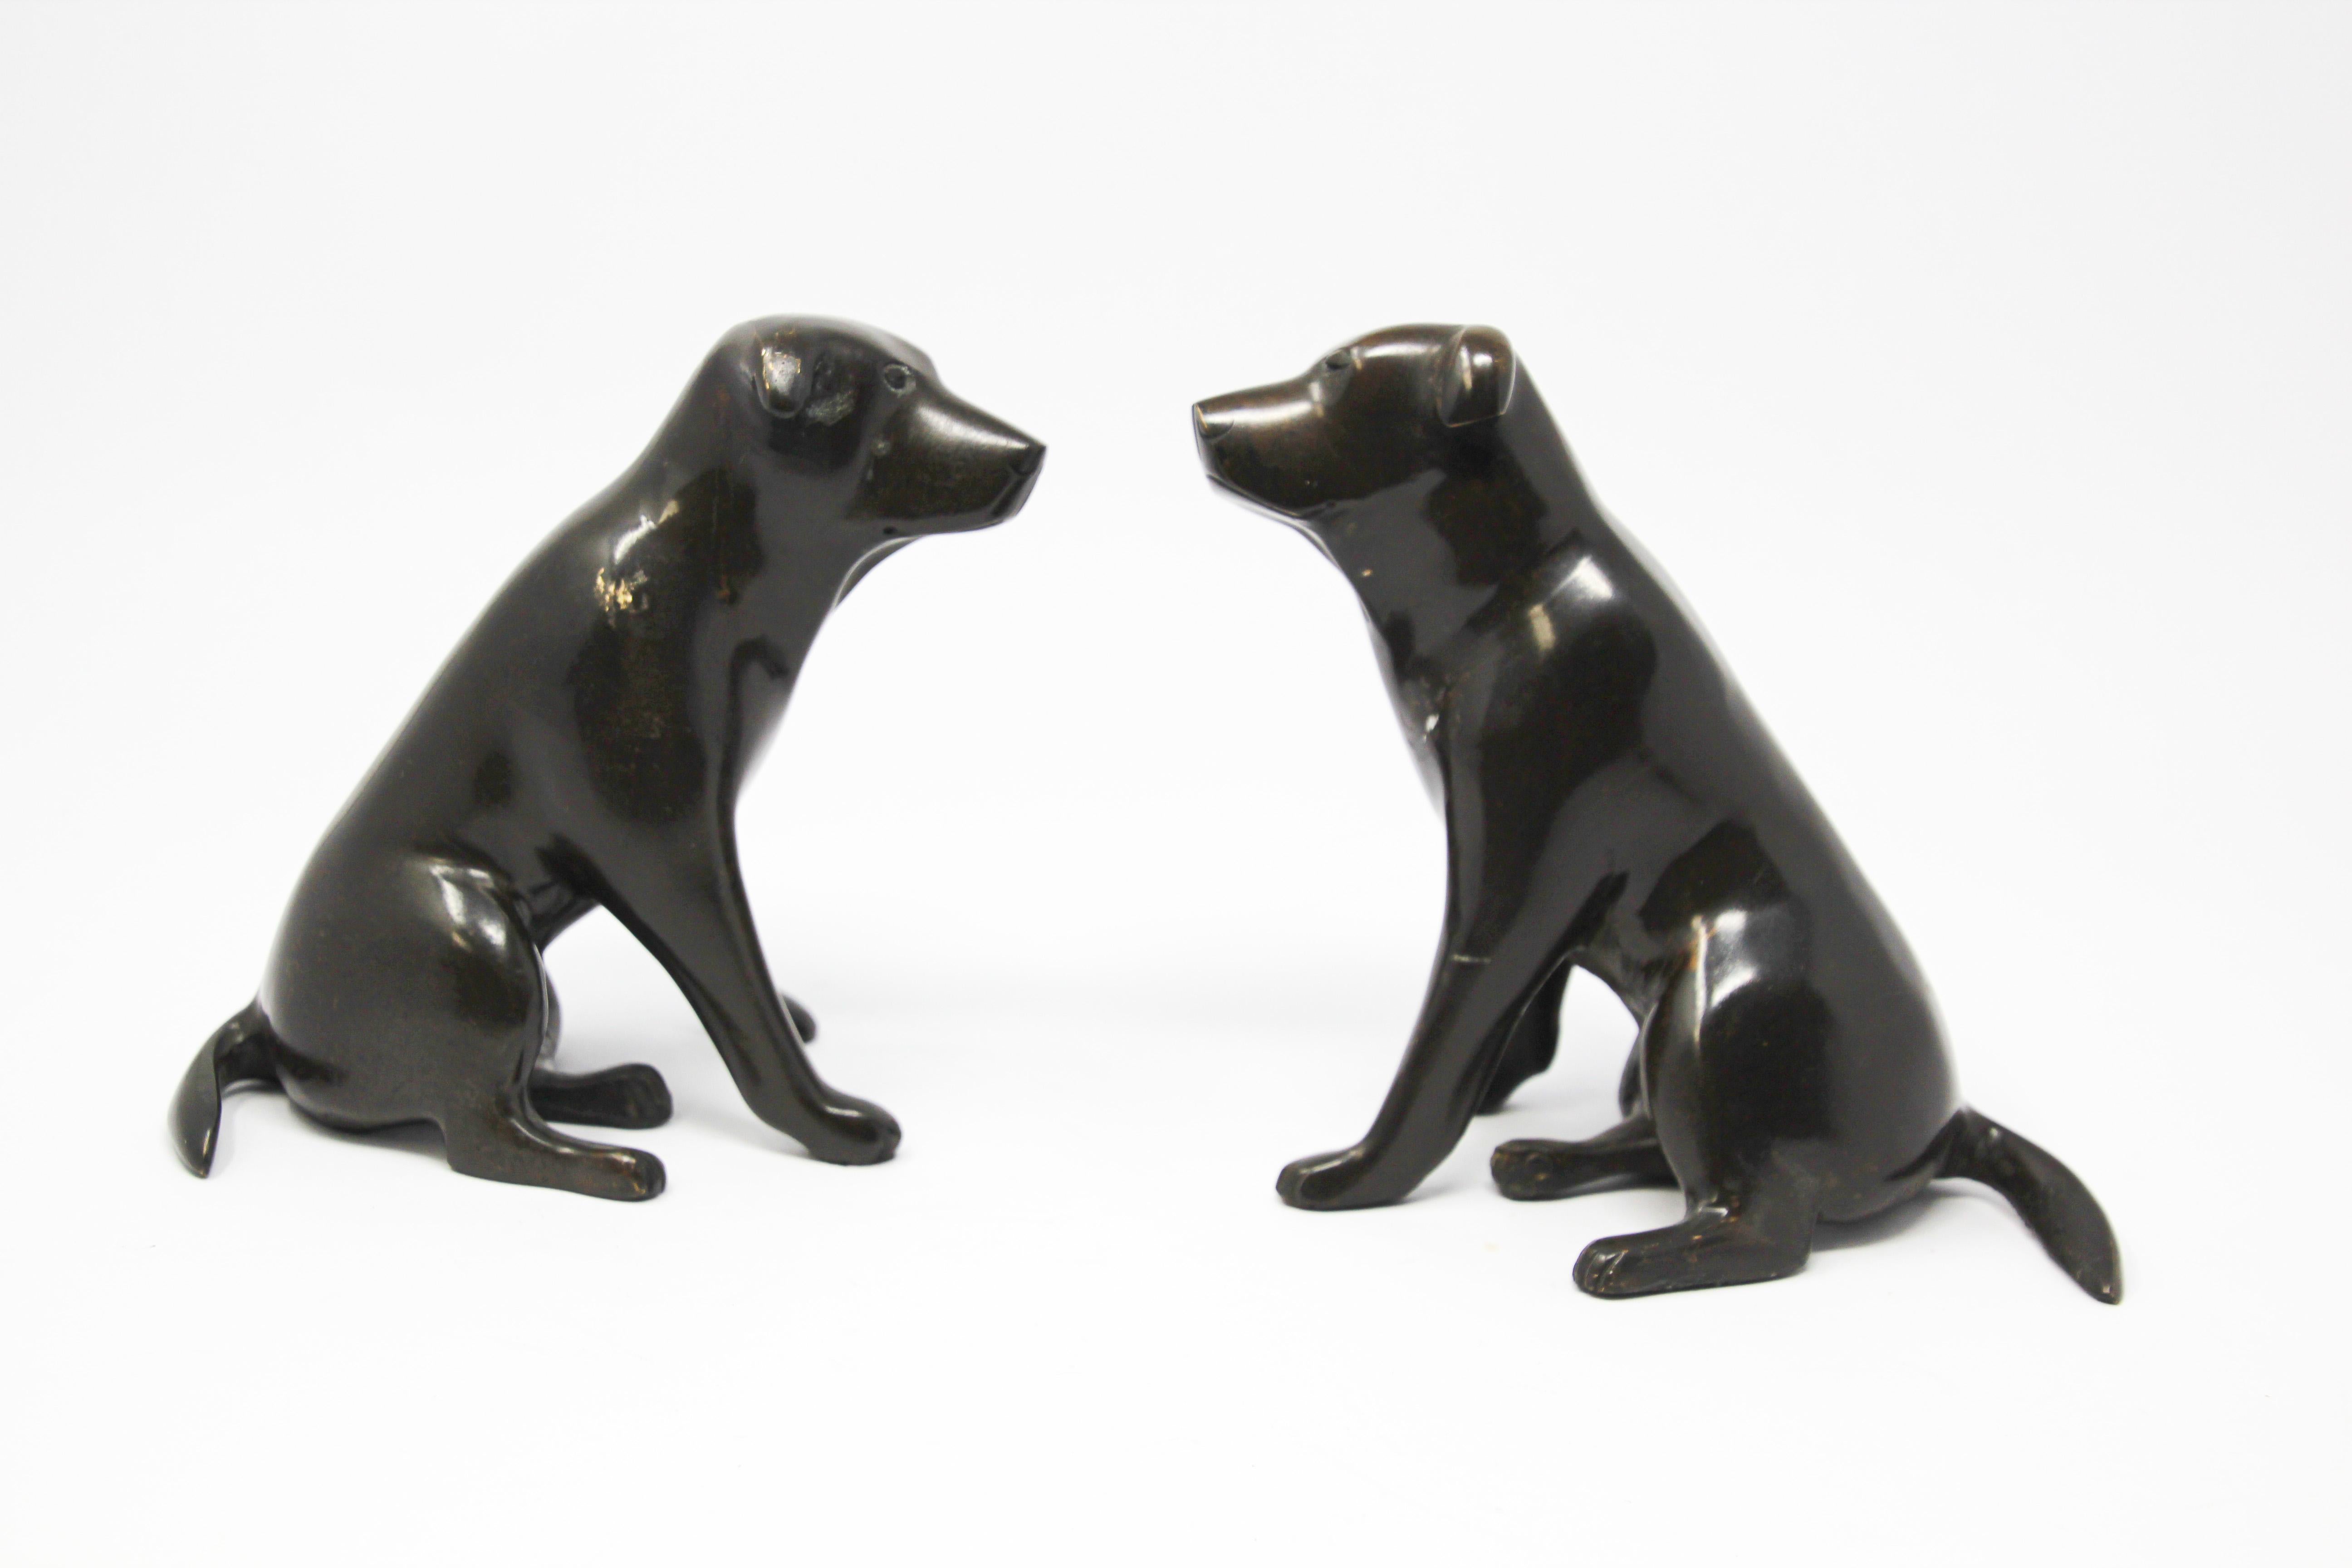 Set of two cast metal Labrador dogs bookends sculptures.
Sculptures depicting the Labrador retriever dogs.
Made with the fusion system cast metal.
In beautiful dark bronze black color.
Size for each is 6